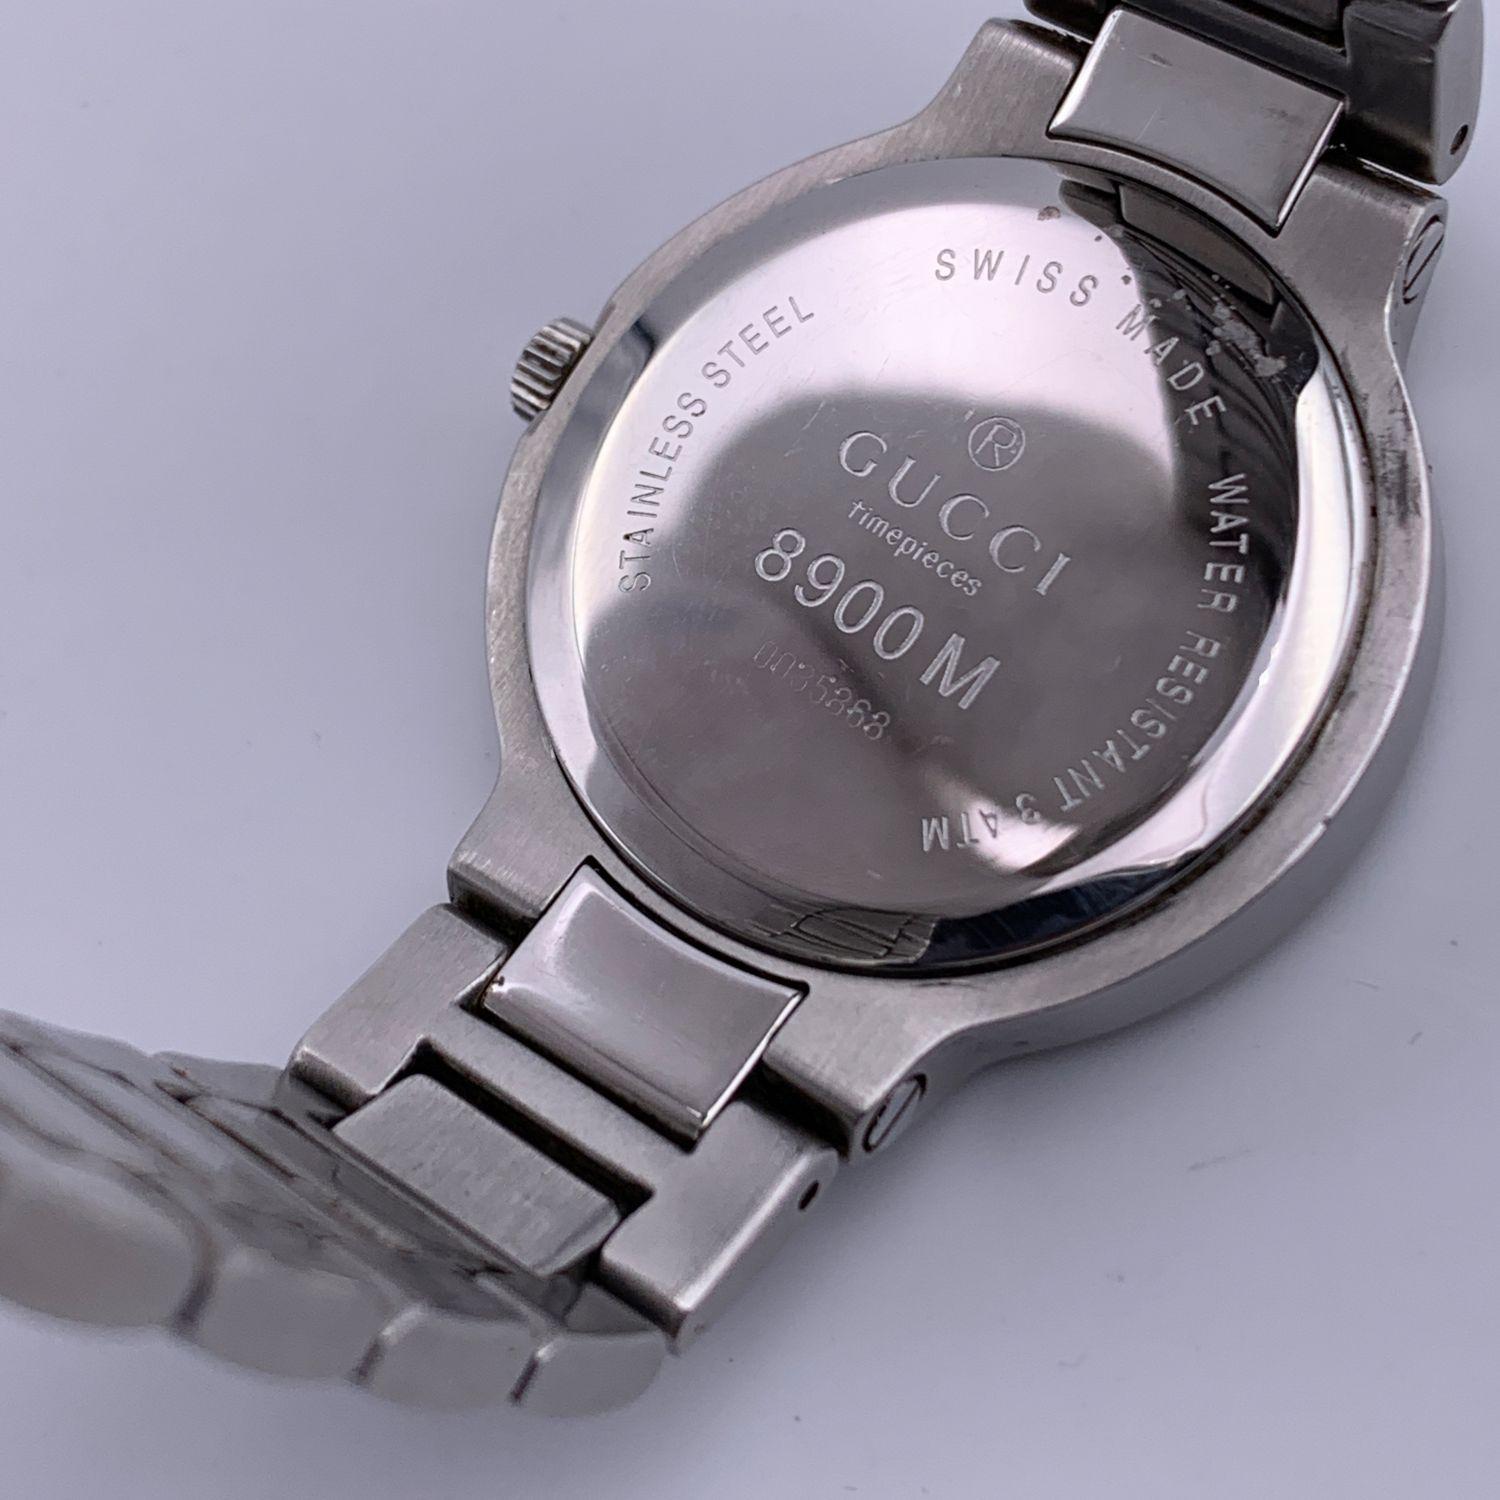 Gucci stainless steel wrist watch, mod. 8900 M. Stainless steel case. White Dial. Date at 6 o'clock. Sapphire crystal. Swiss Made Quartz movement. Gucci written on face. Arabic numbers. Water Resistant to 3atm. Deployant Clasp. Swiss Made. Will fit